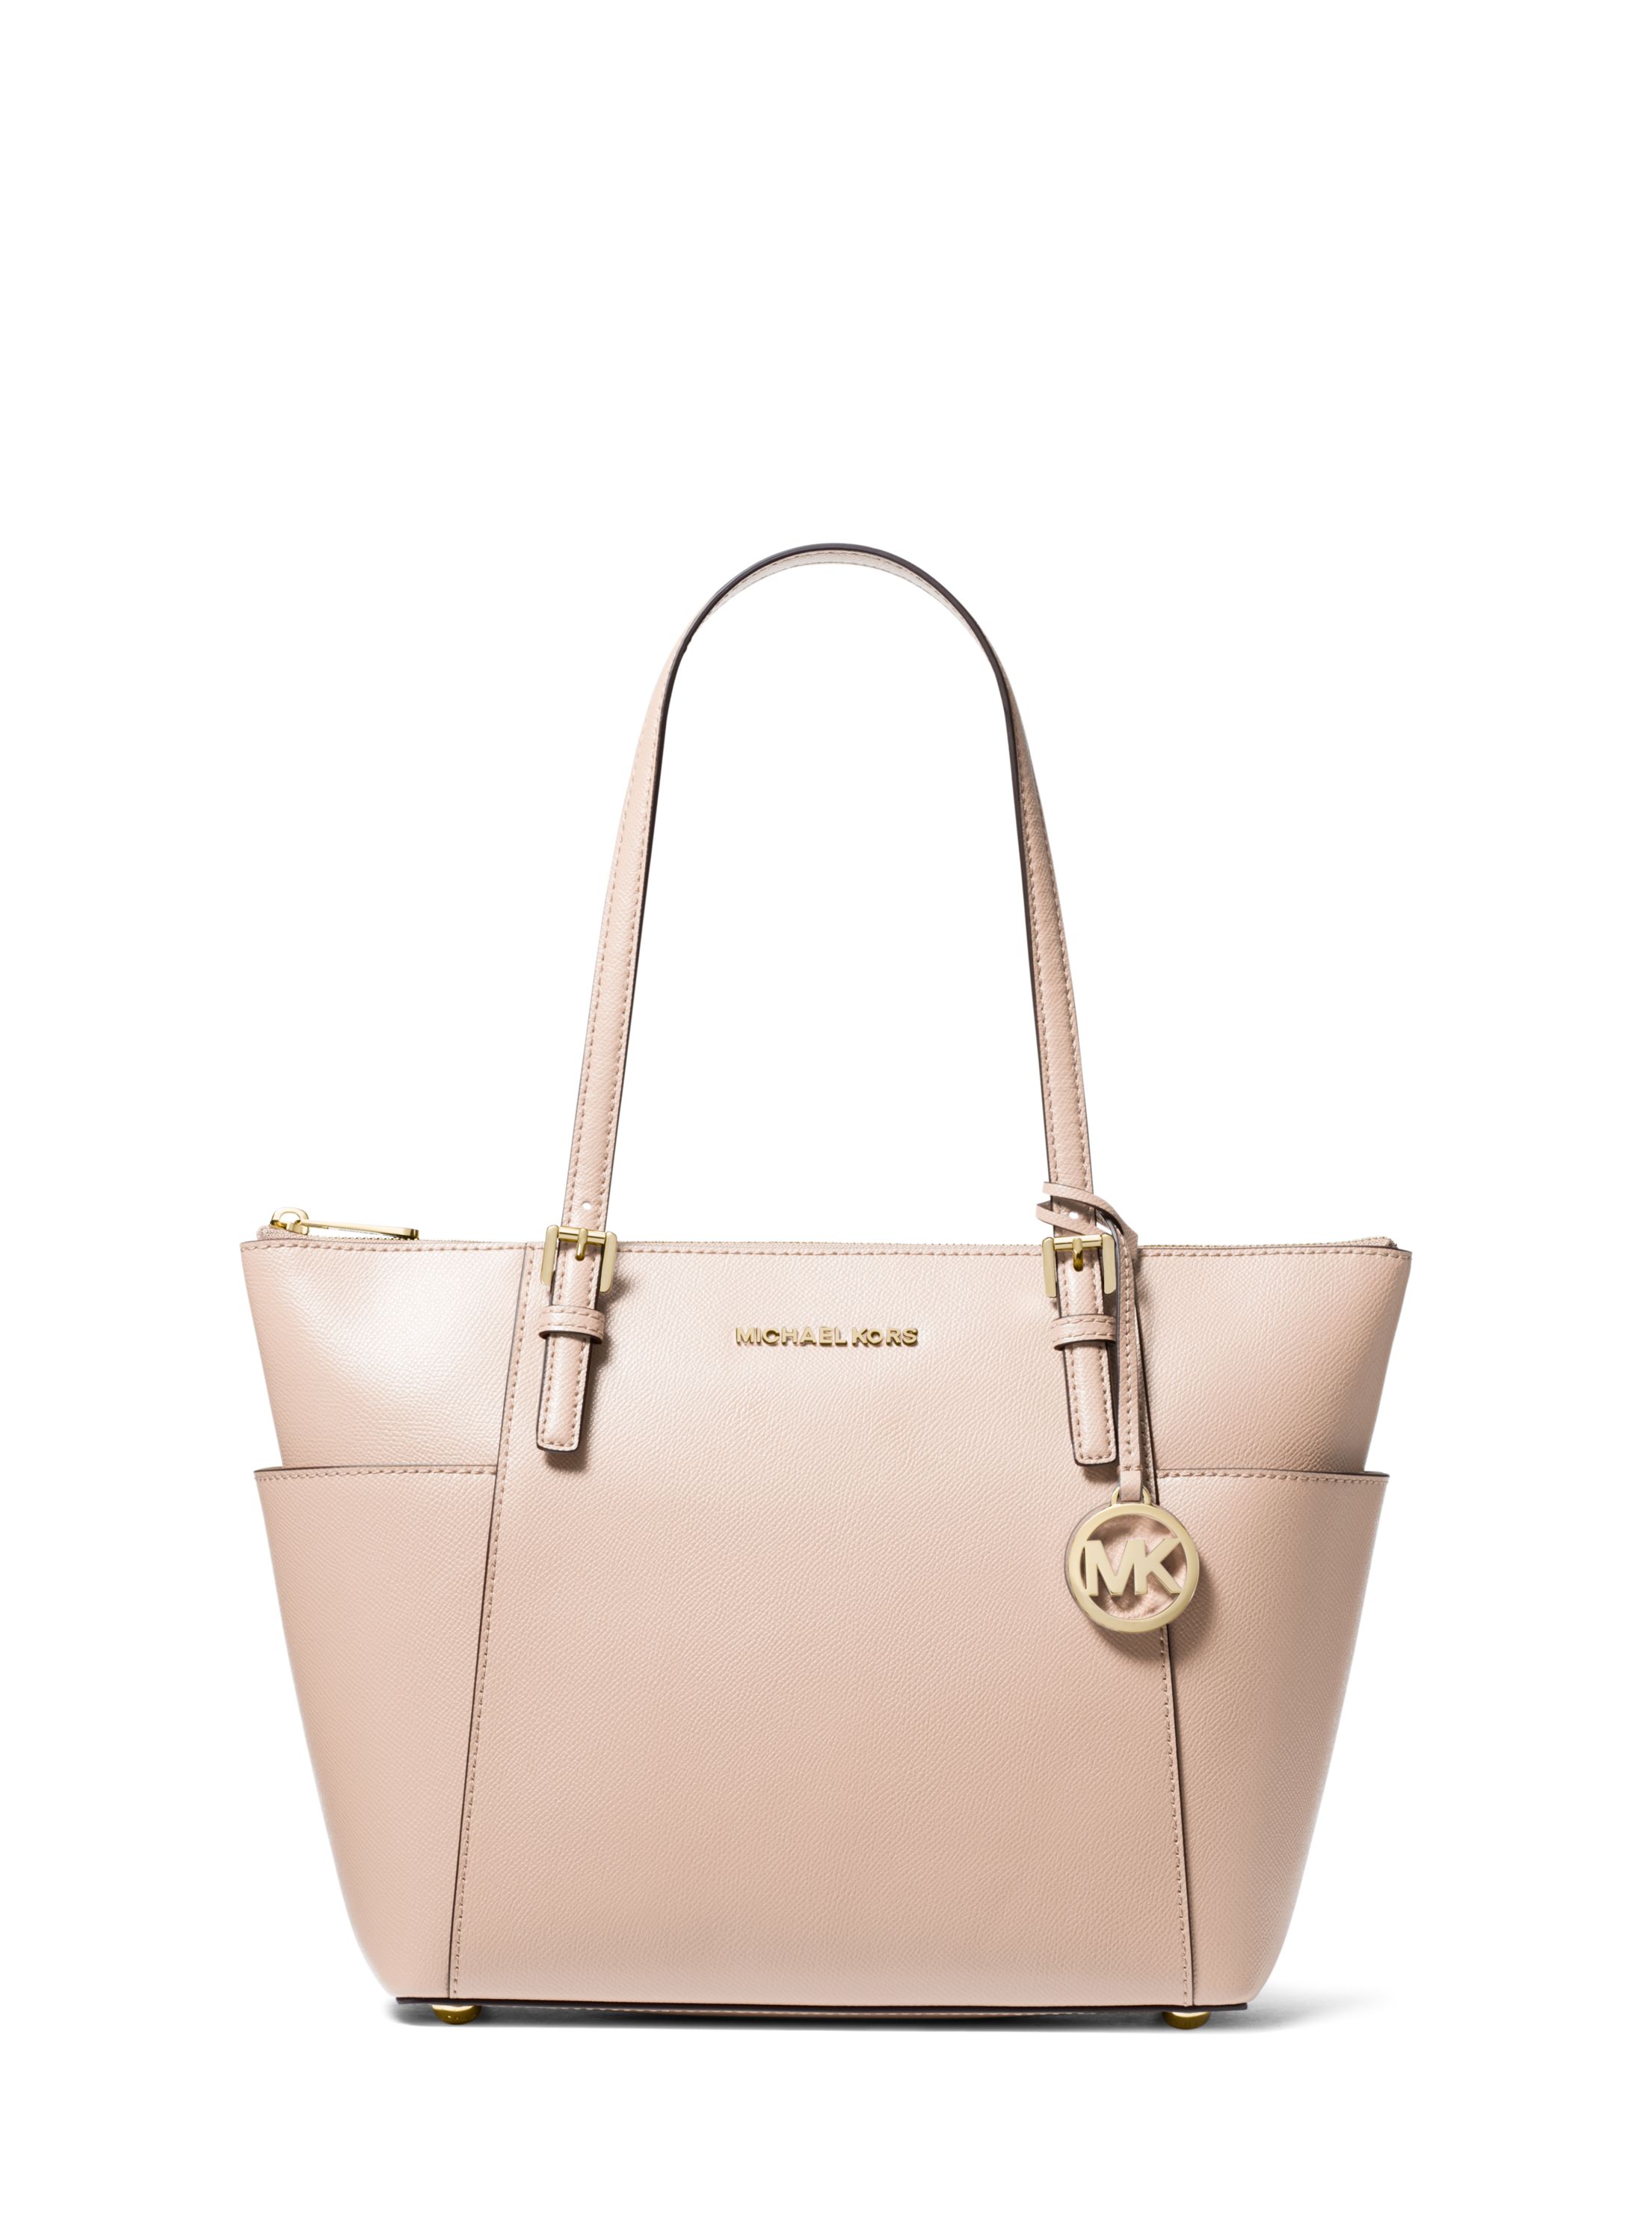 MICHAEL Michael Kors Eastwest Top Zip Saffiano Leather Tote Bag in Pink